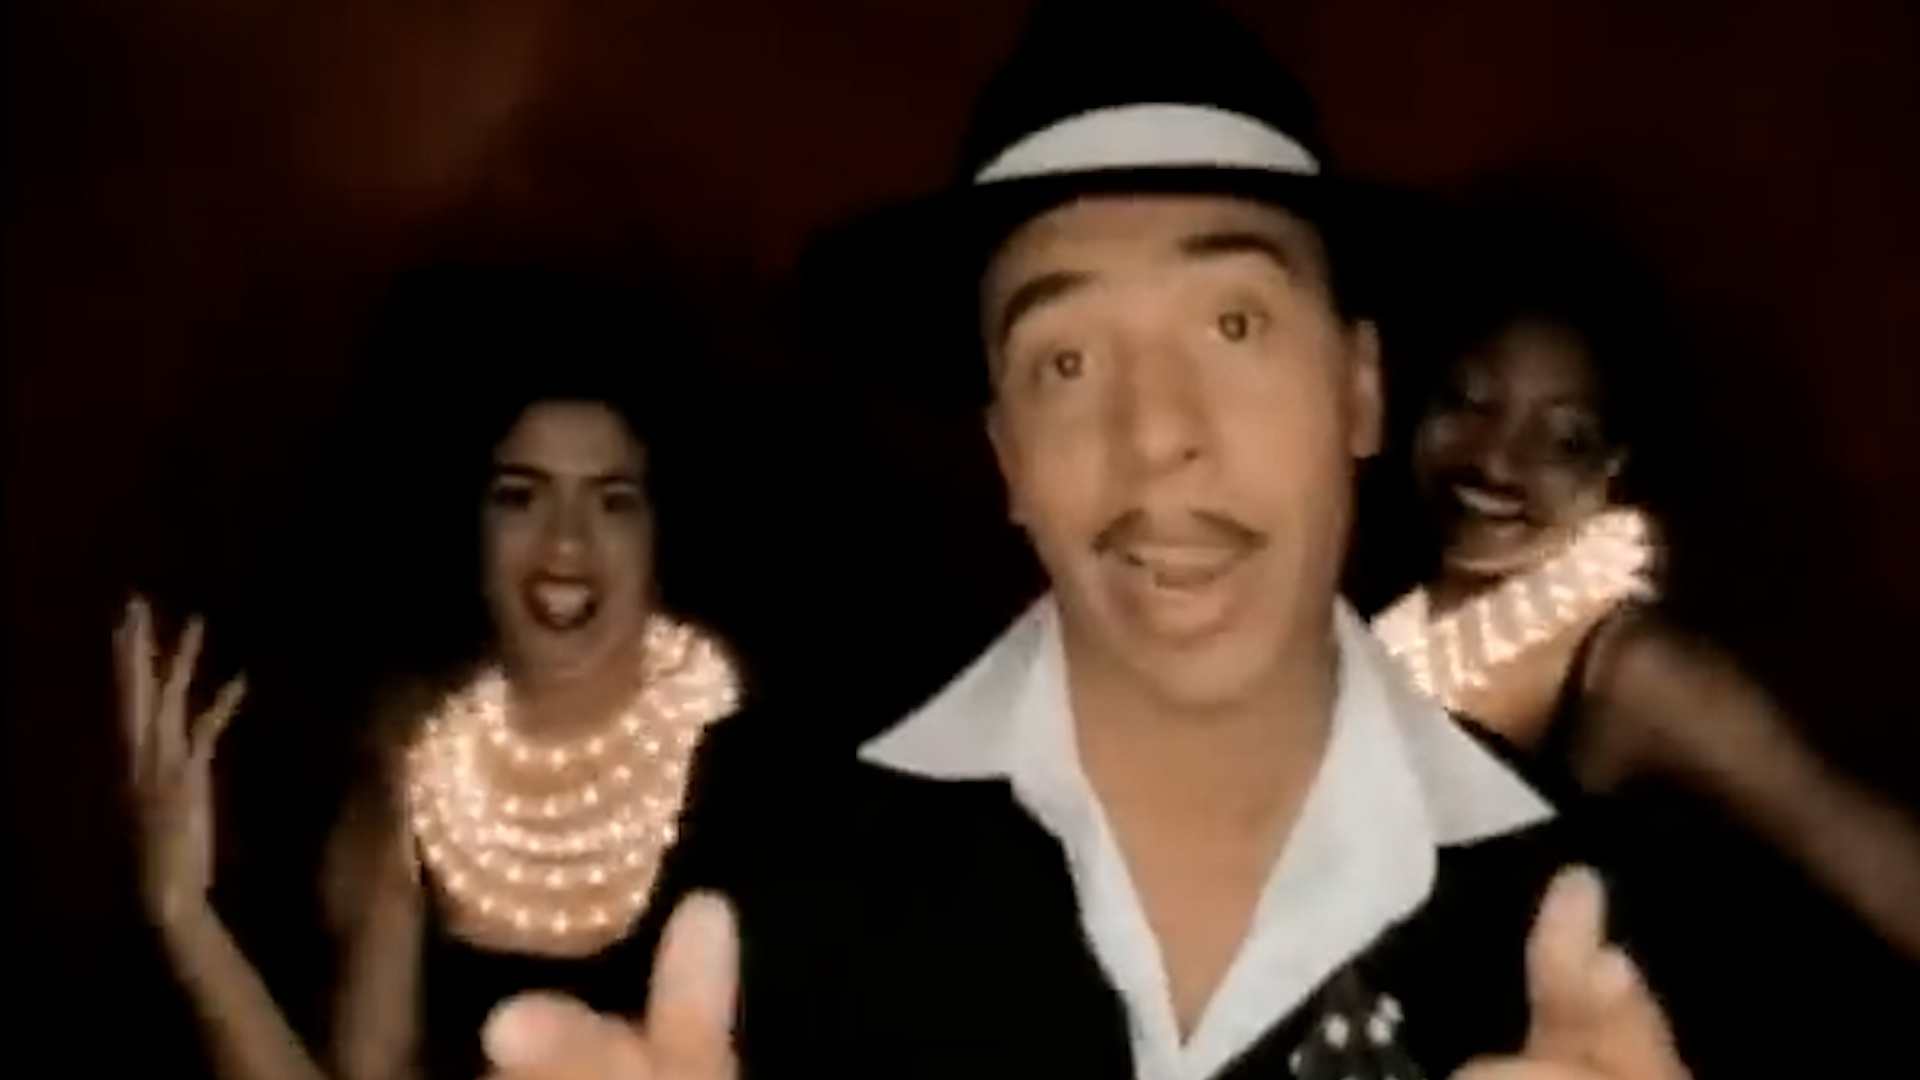 The official video clip for Lou Bega's hit song Mambo No.5 (A Little Bit of)